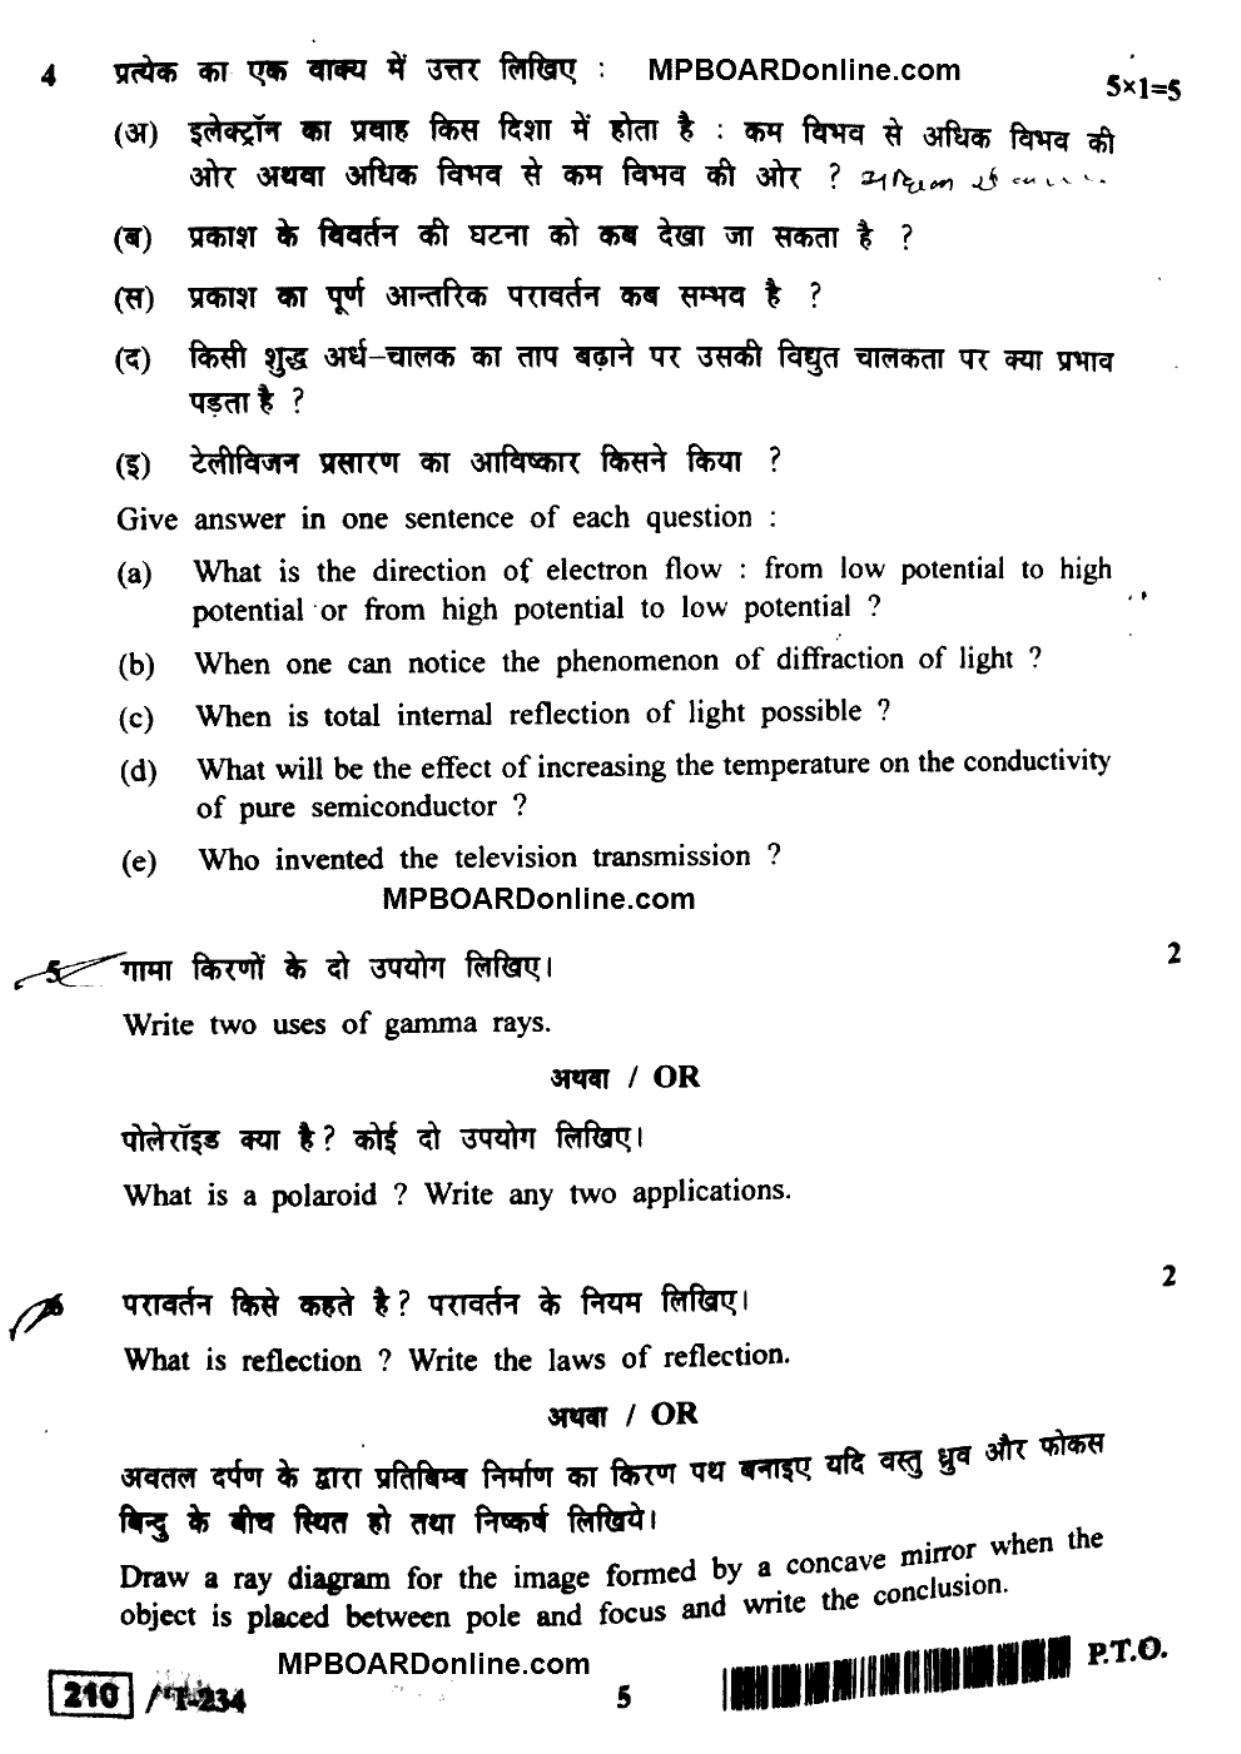 MP Board Class 12 Physics 2018 Question Paper - Page 5